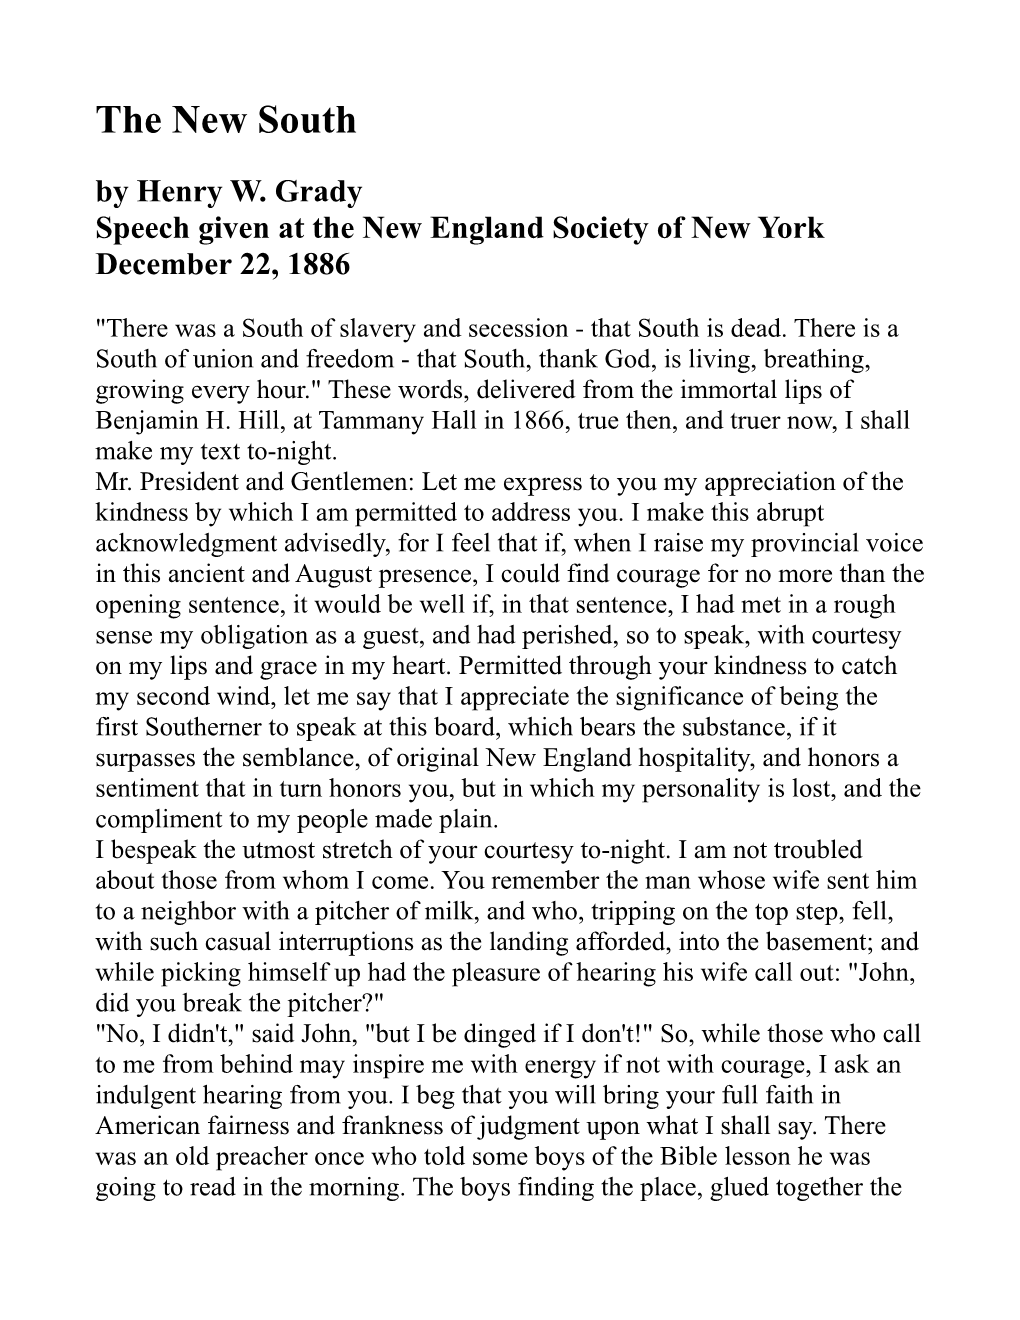 Speech Given at the New England Society of New York